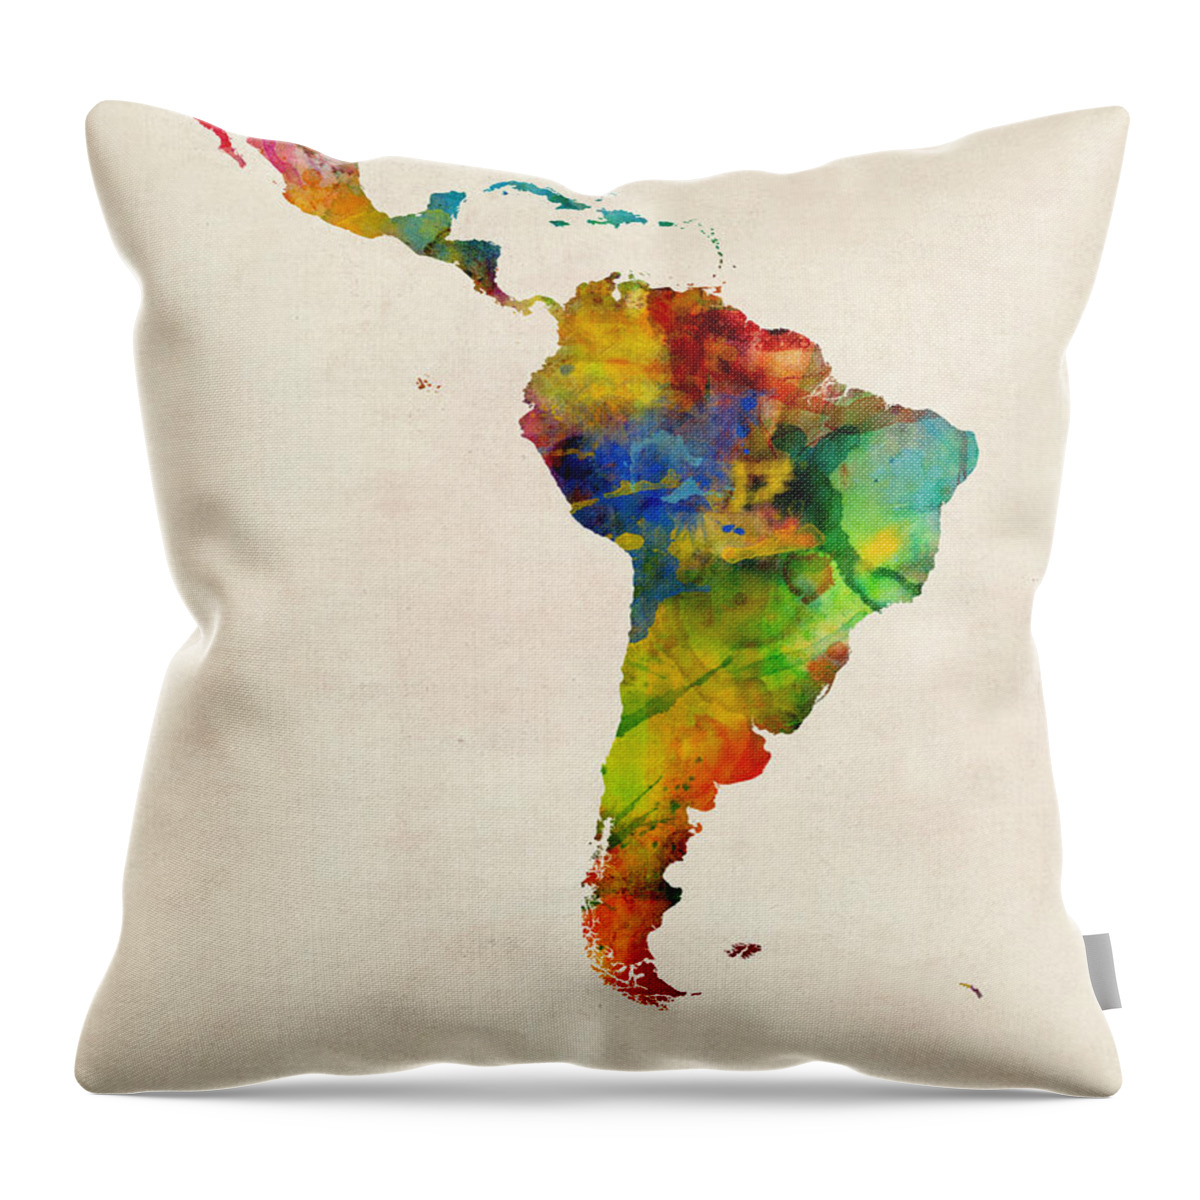 South America Map Throw Pillow featuring the digital art Latin America Watercolor Map by Michael Tompsett